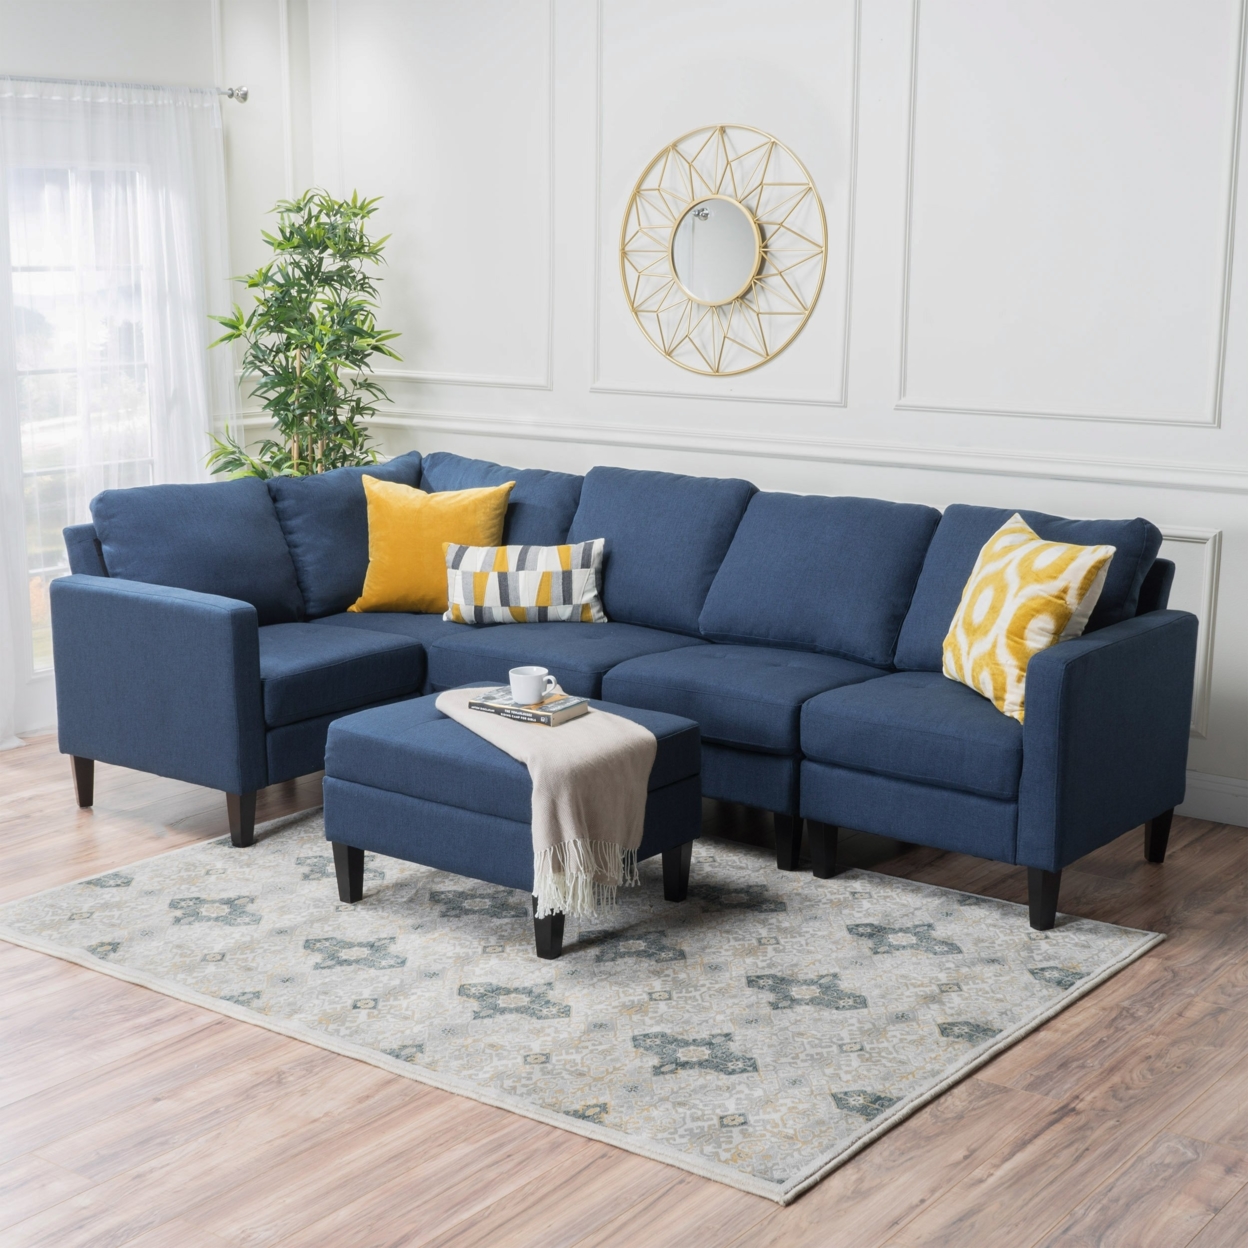 Bridger Fabric Sectional Couch With Ottoman - Oxford Gray